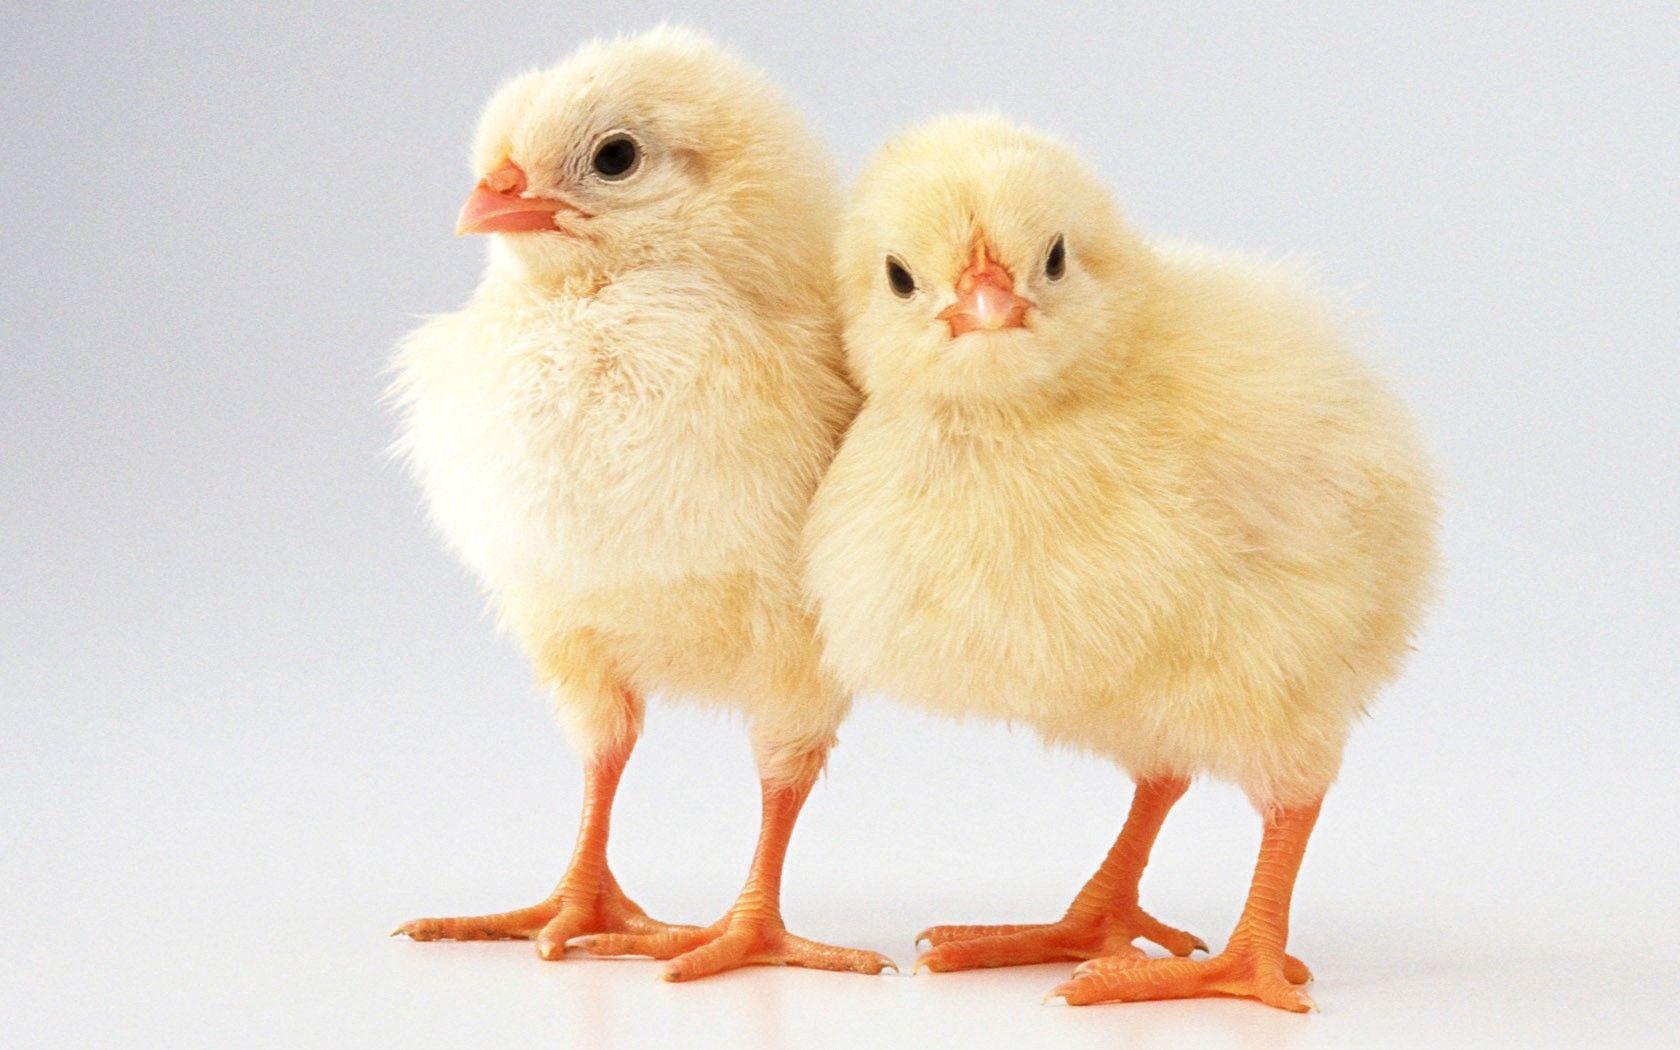 Chicks HD Wallpaper Image Picture Photo Download